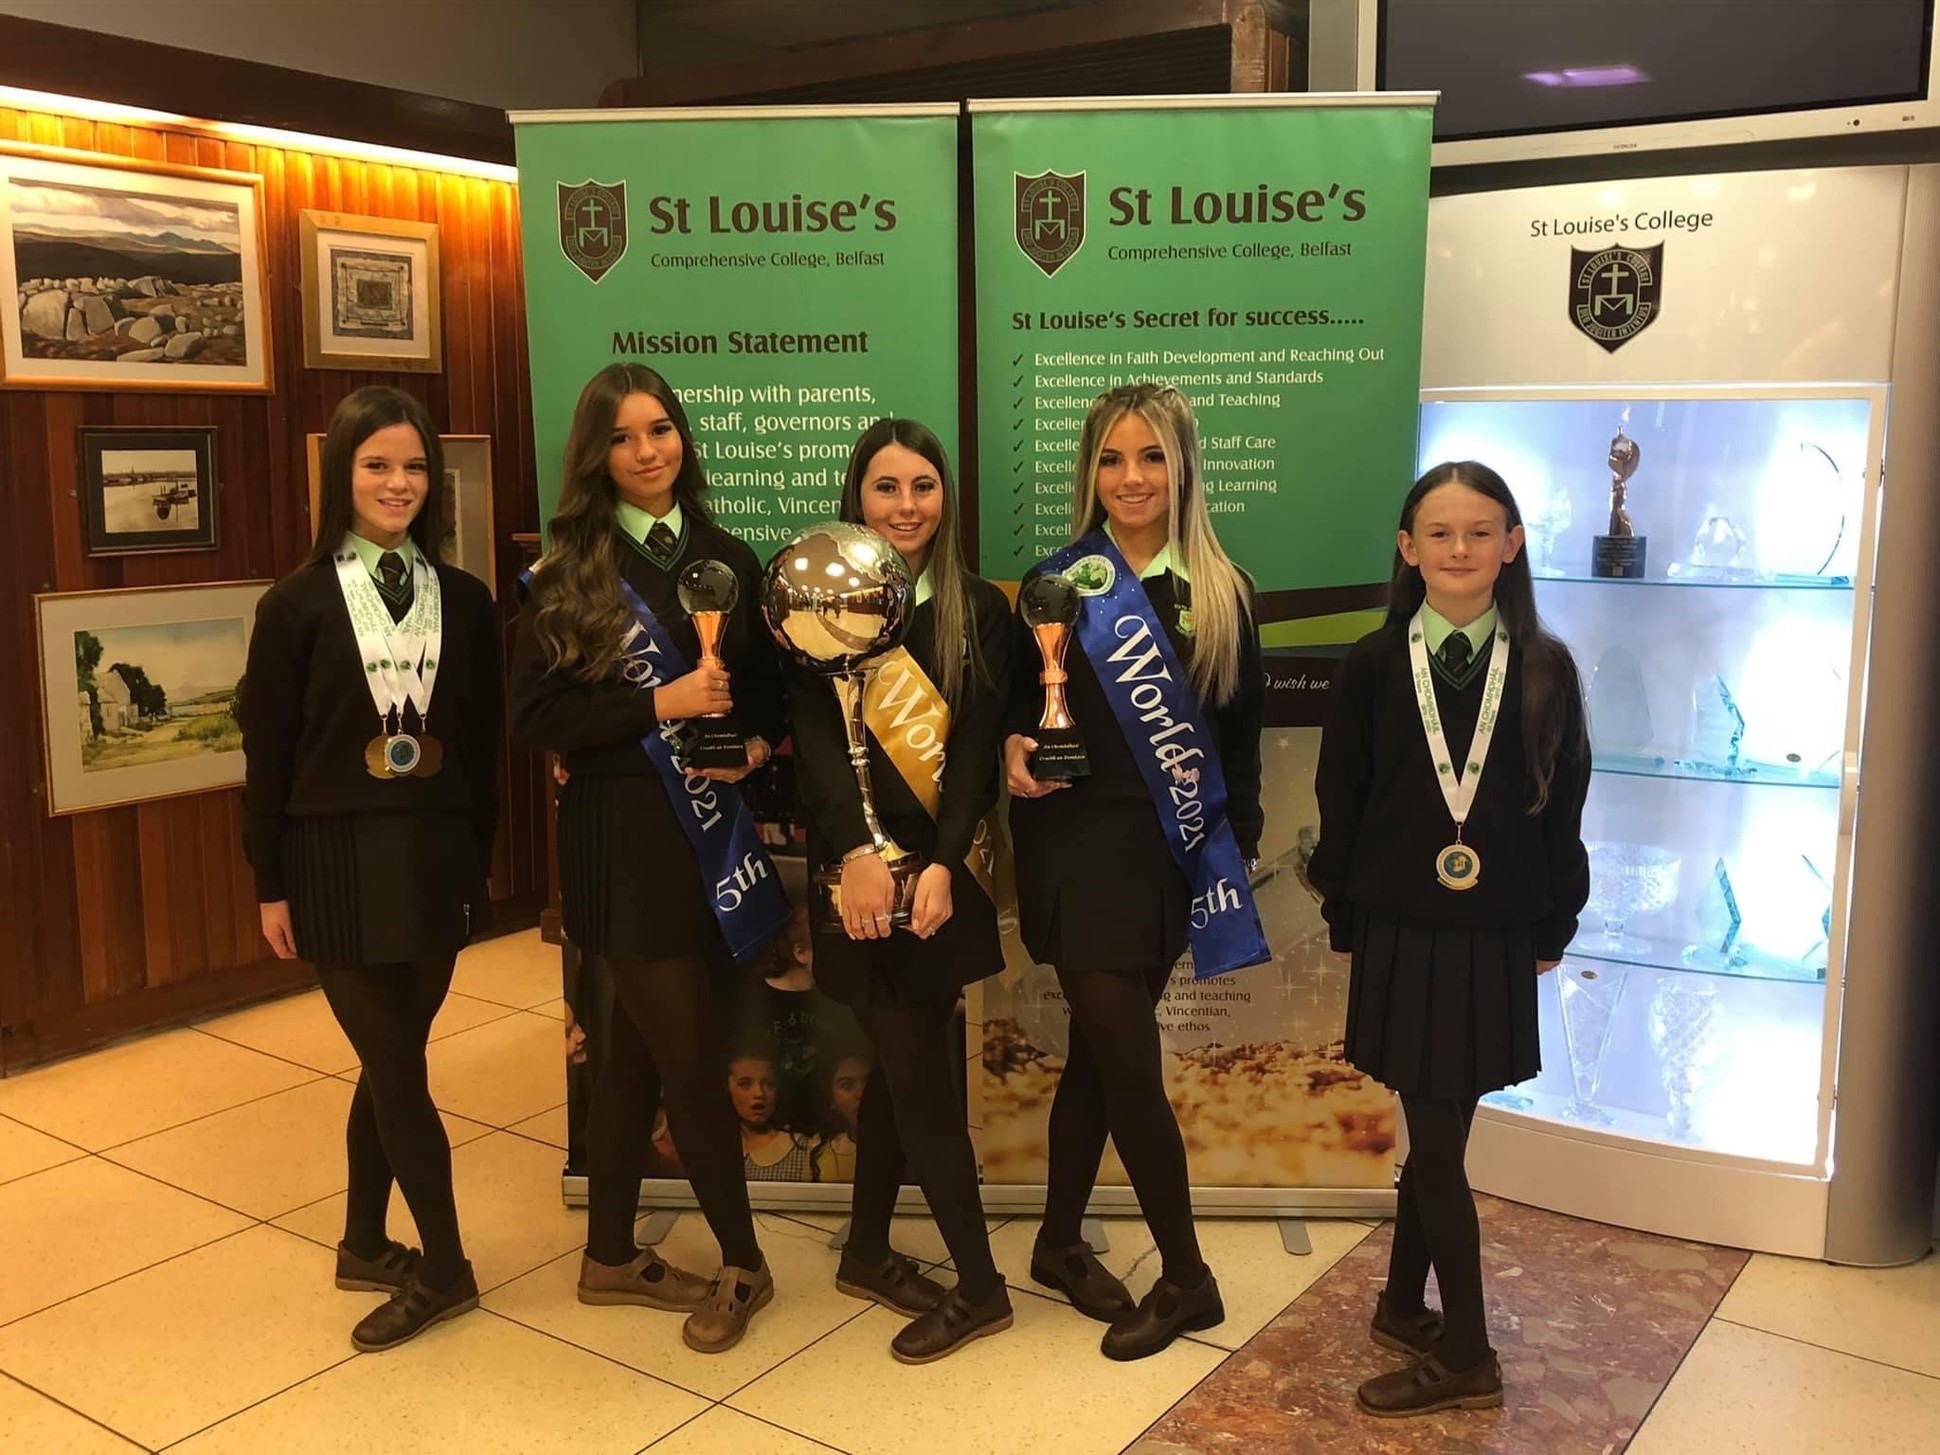 IRISH DANCING: Erin, Carys, Caragh, Clara and Emma who participated and placed in the World Irish Dancing Championships in Killarney. Caragh Hendron achieved first place.